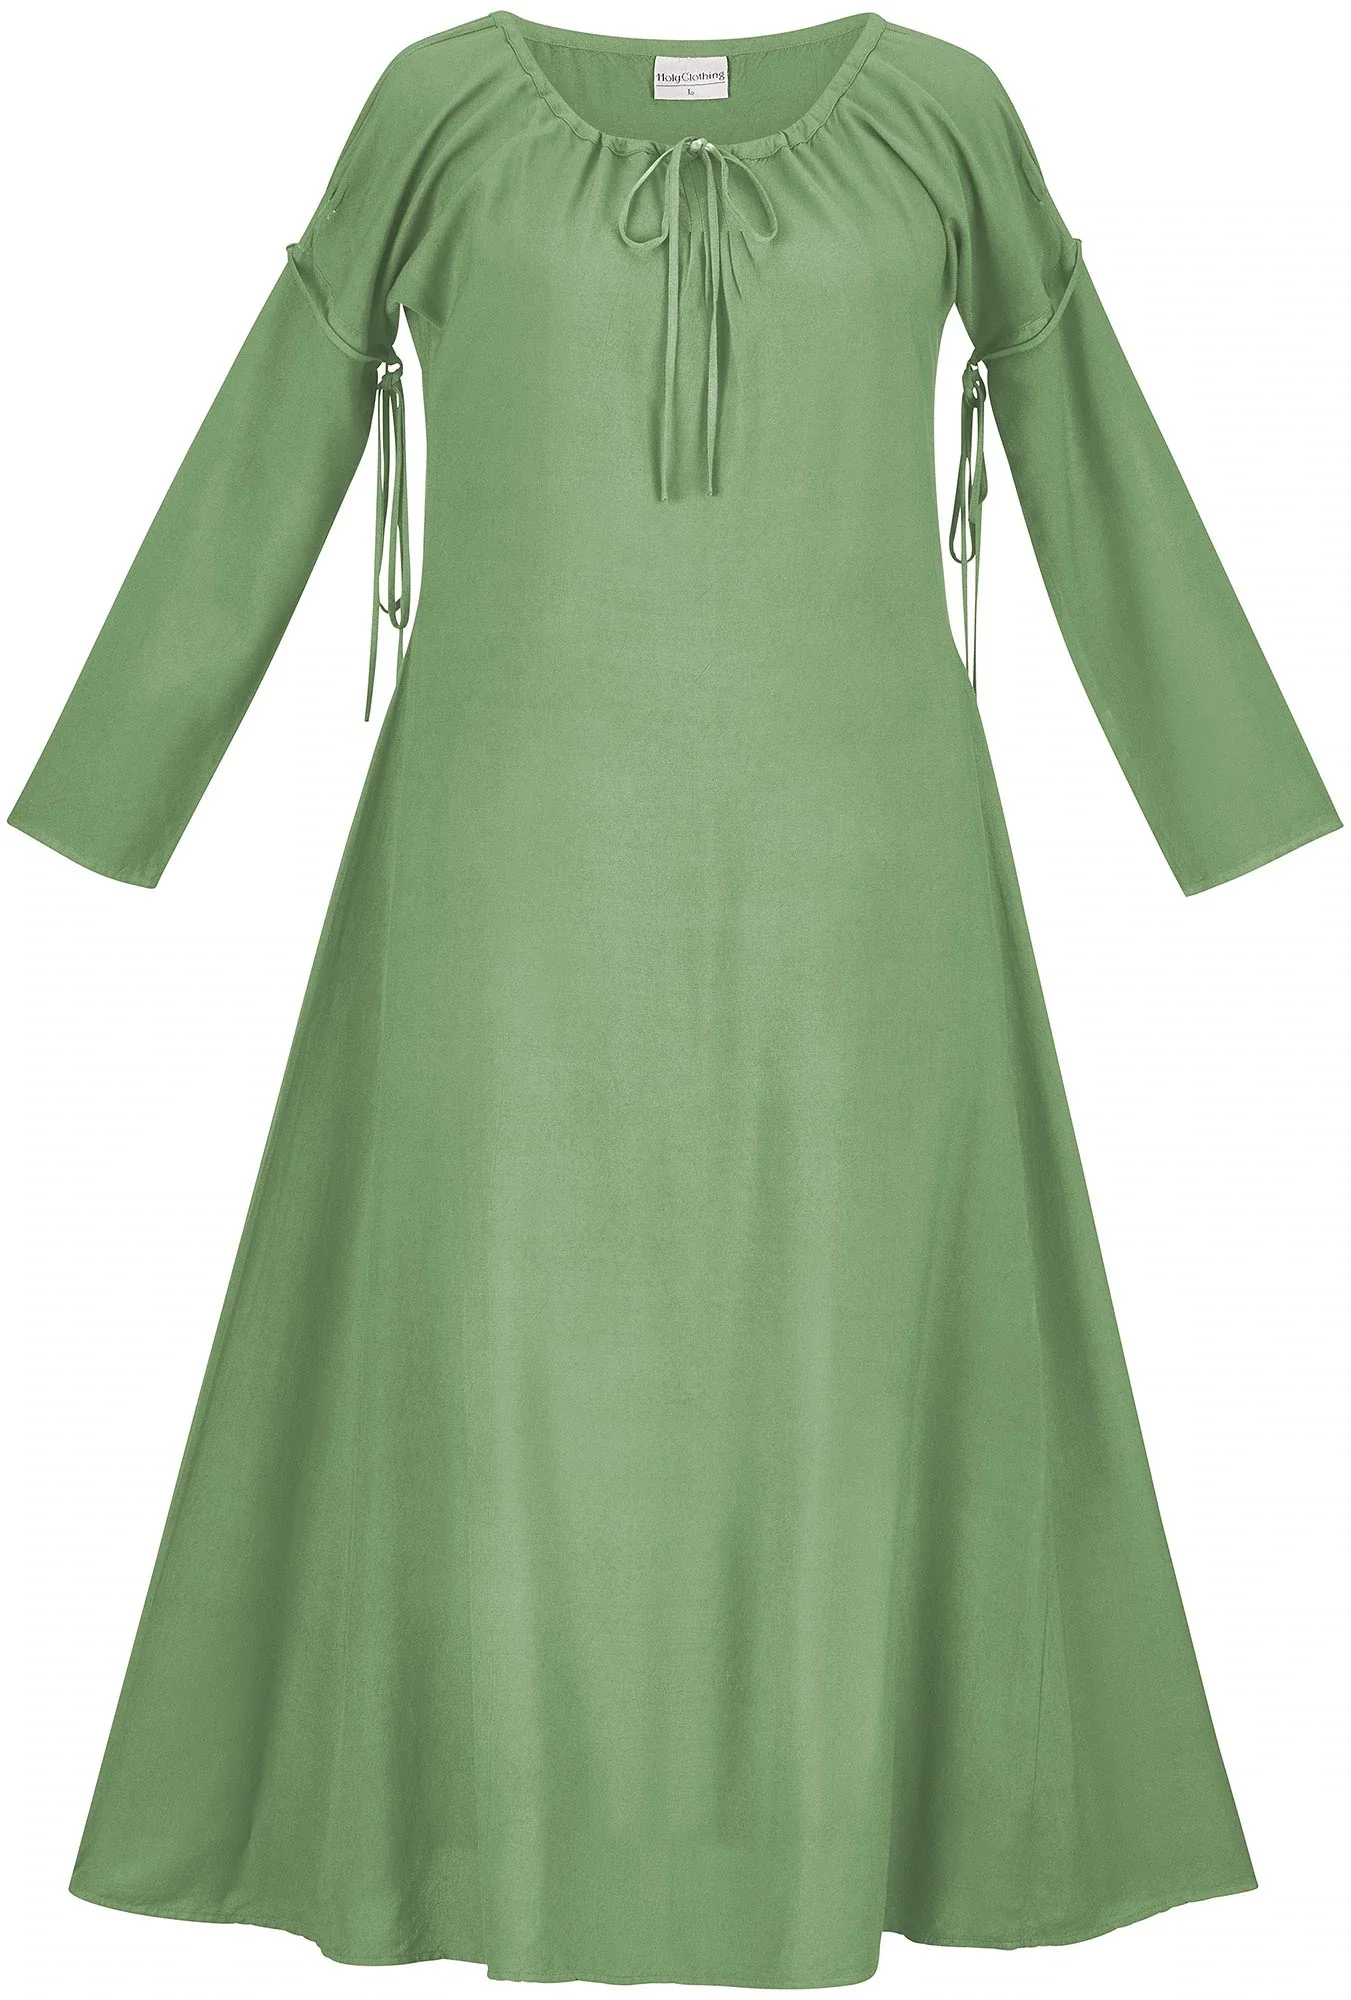 Image of Marion Chemise Limited Edition Spring Basil